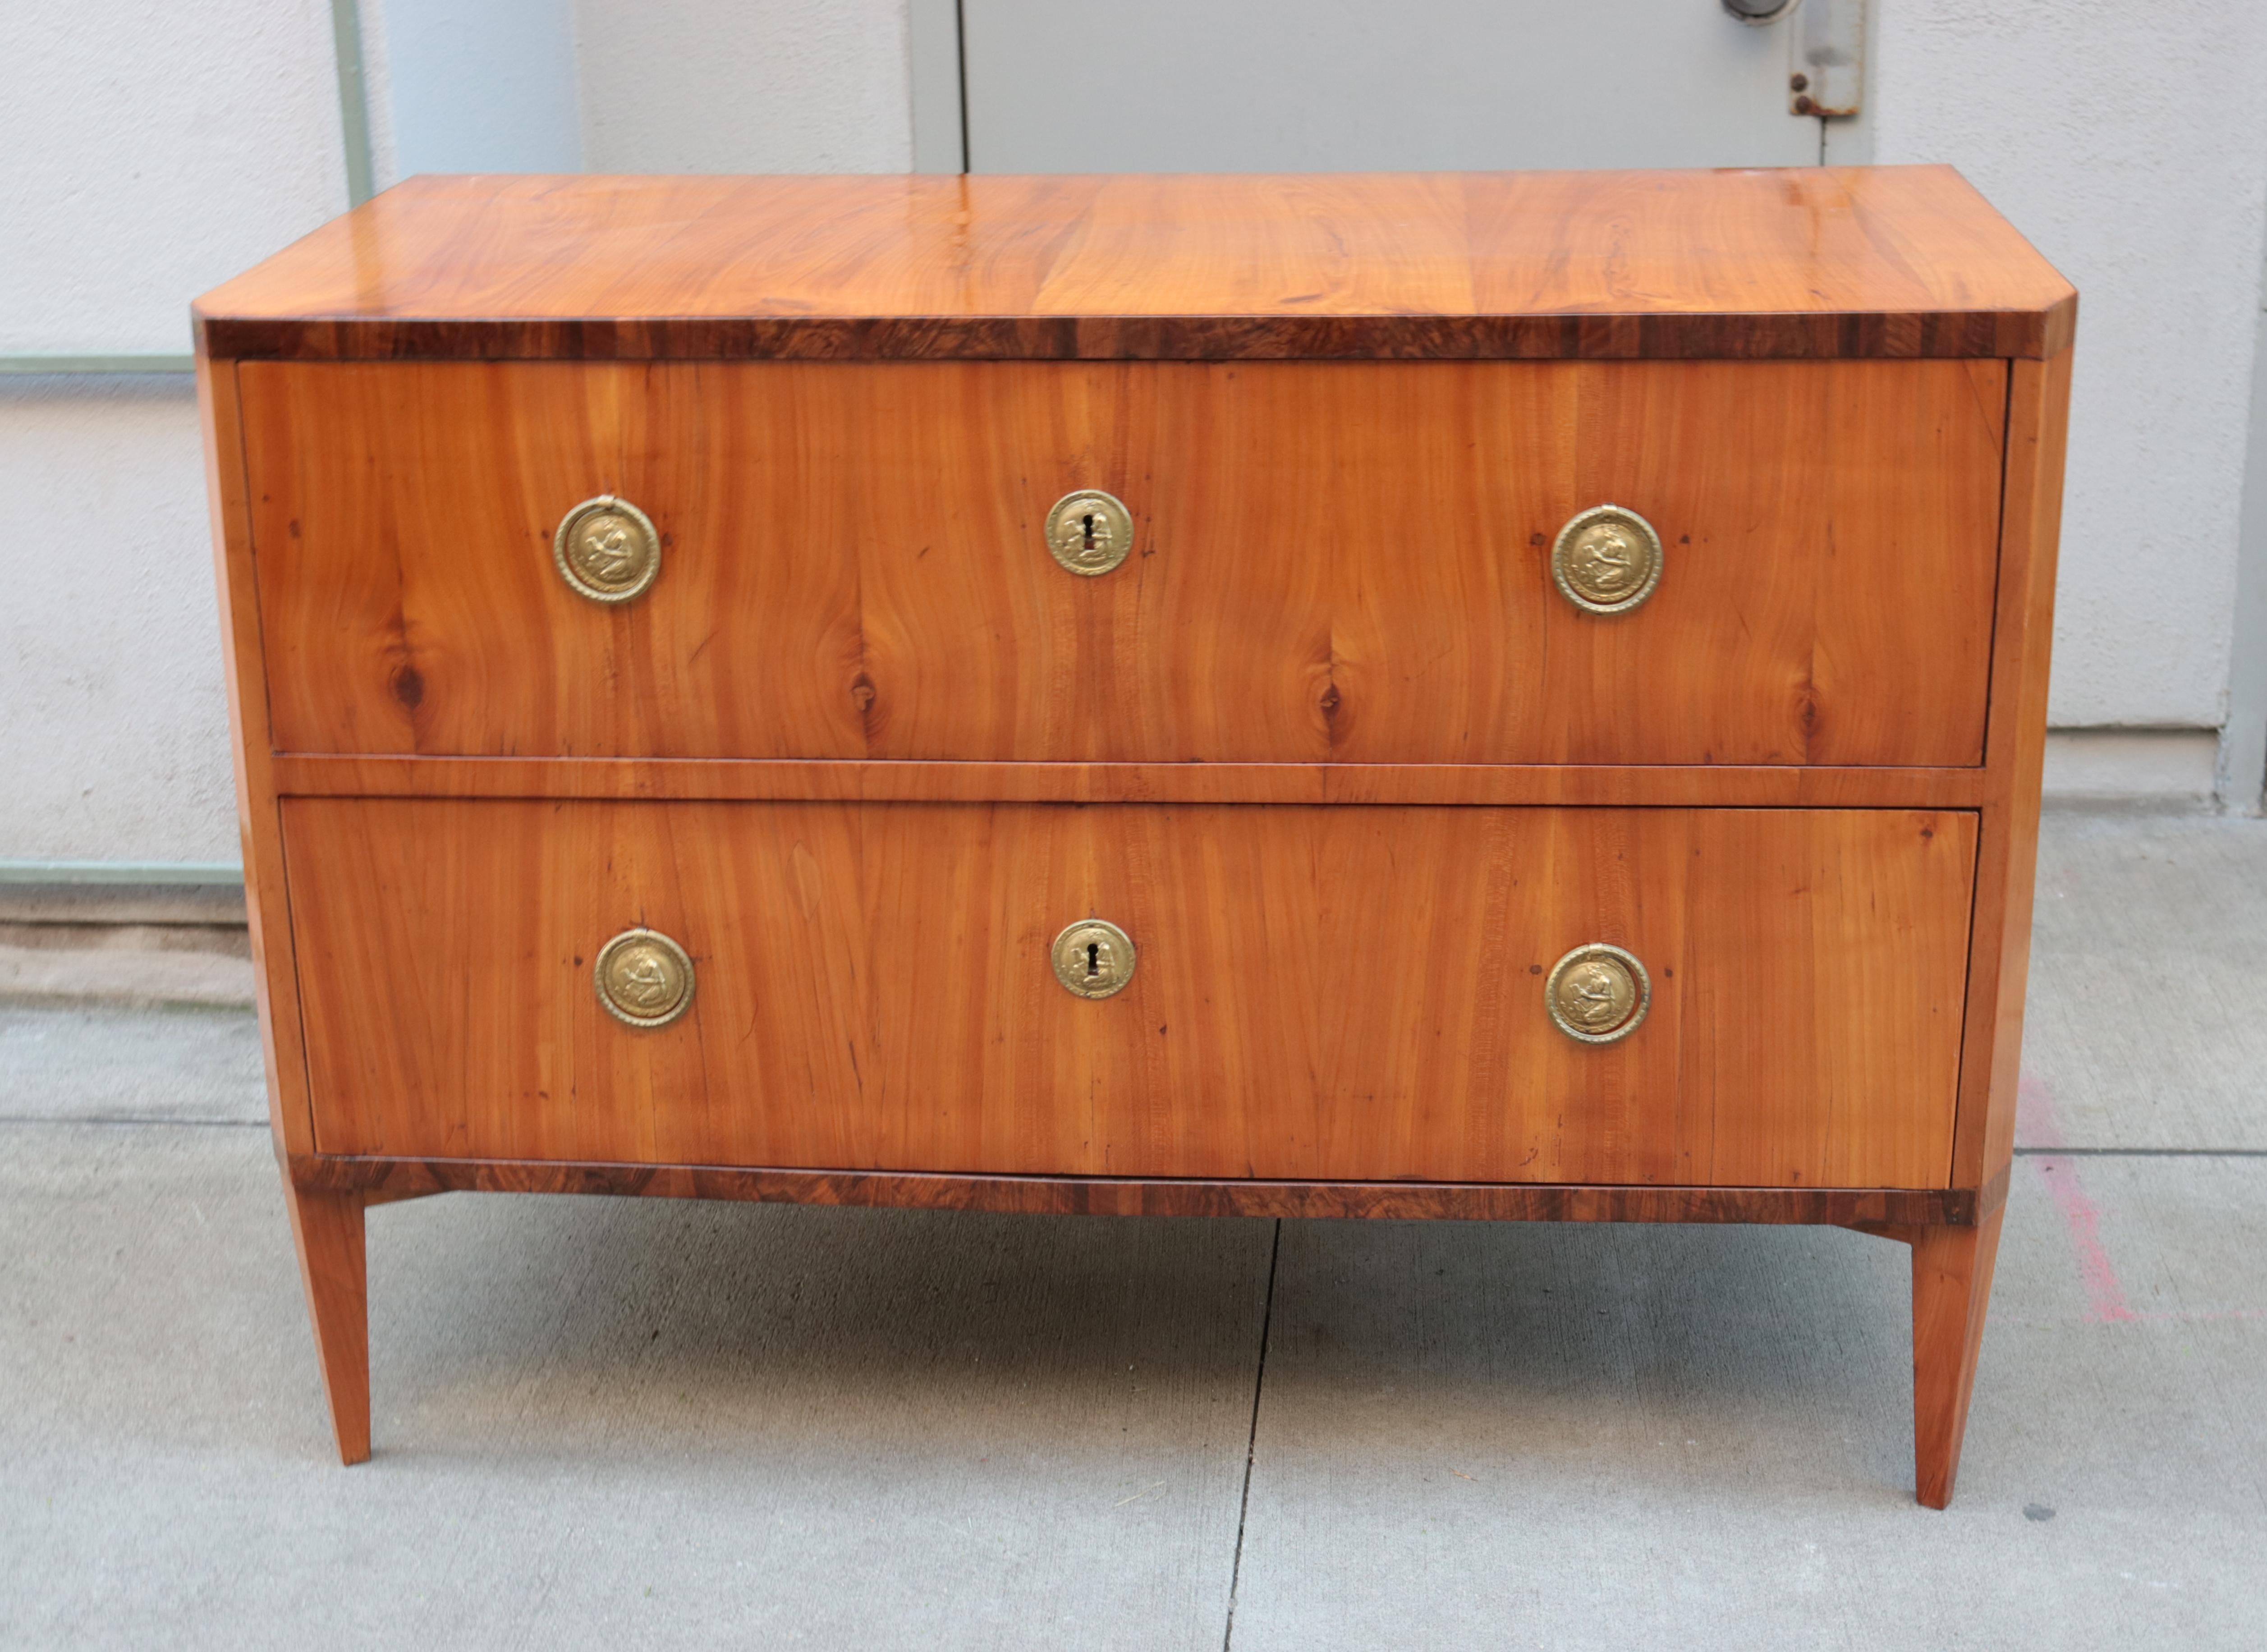 Biedermeier two-drawer commode.
Walnut with patinated brass details.